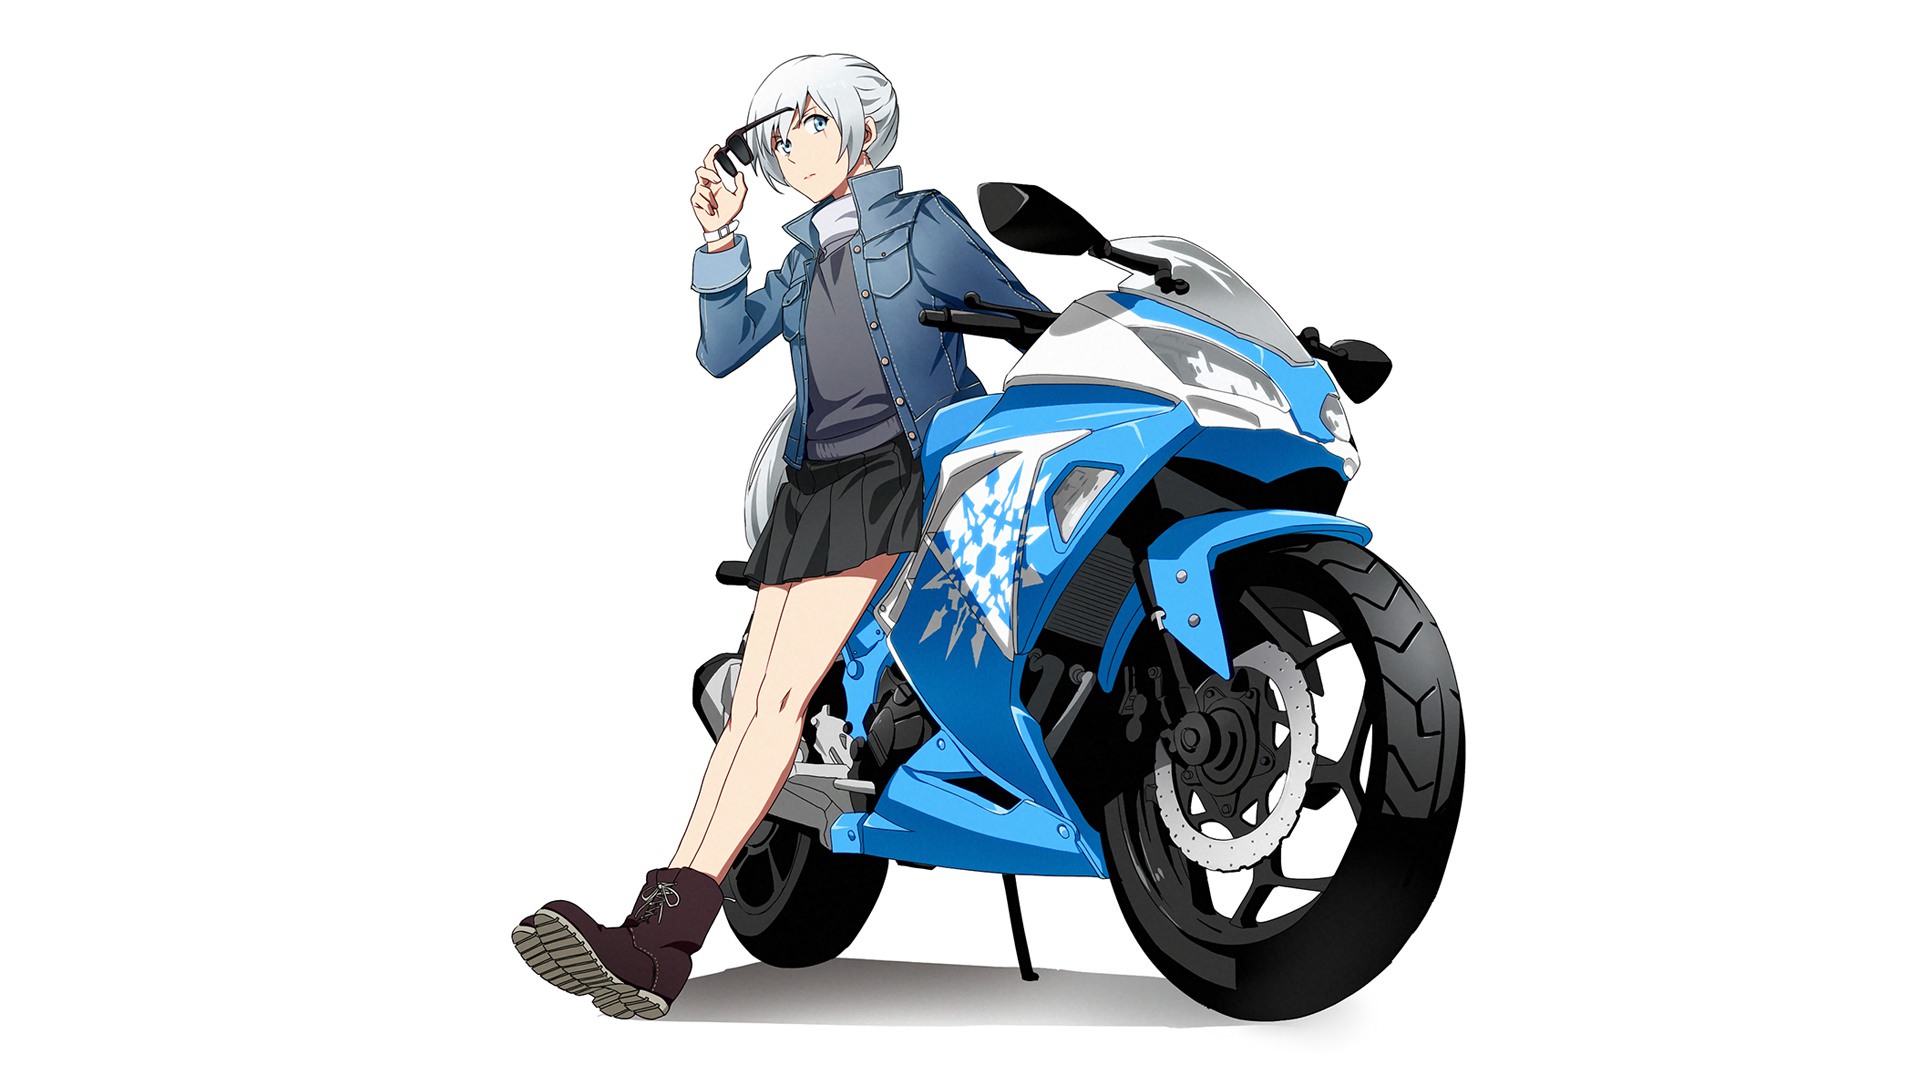 Girl On Motorcycle Wallpaper - Rwby Motorcycle , HD Wallpaper & Backgrounds